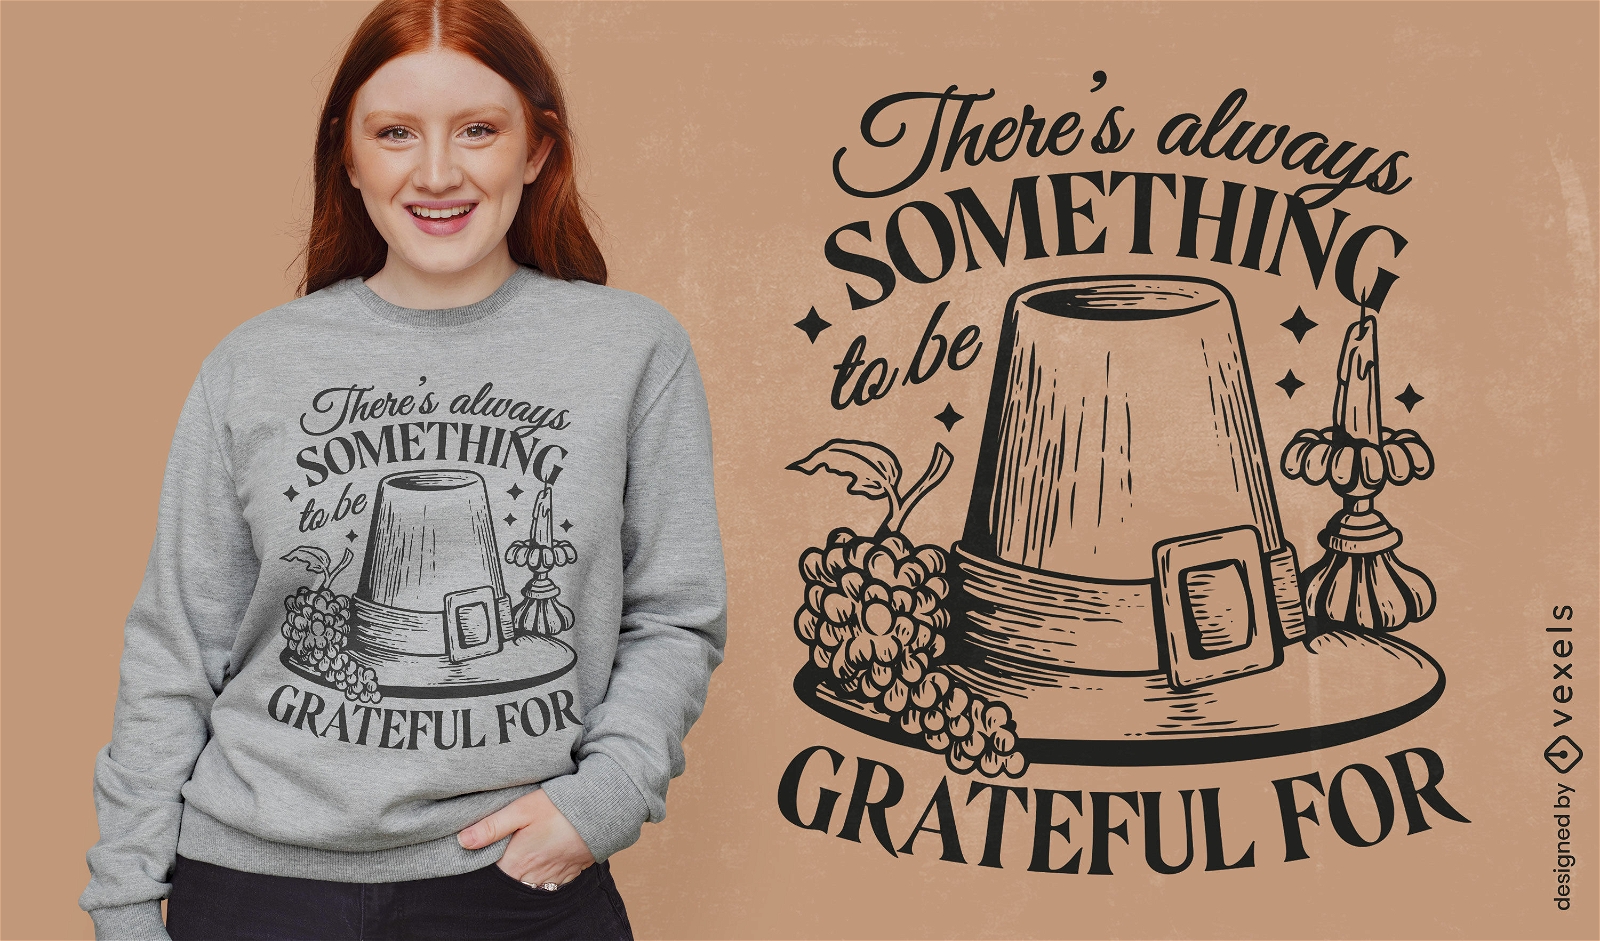 Grateful holiday quote t-shirt design